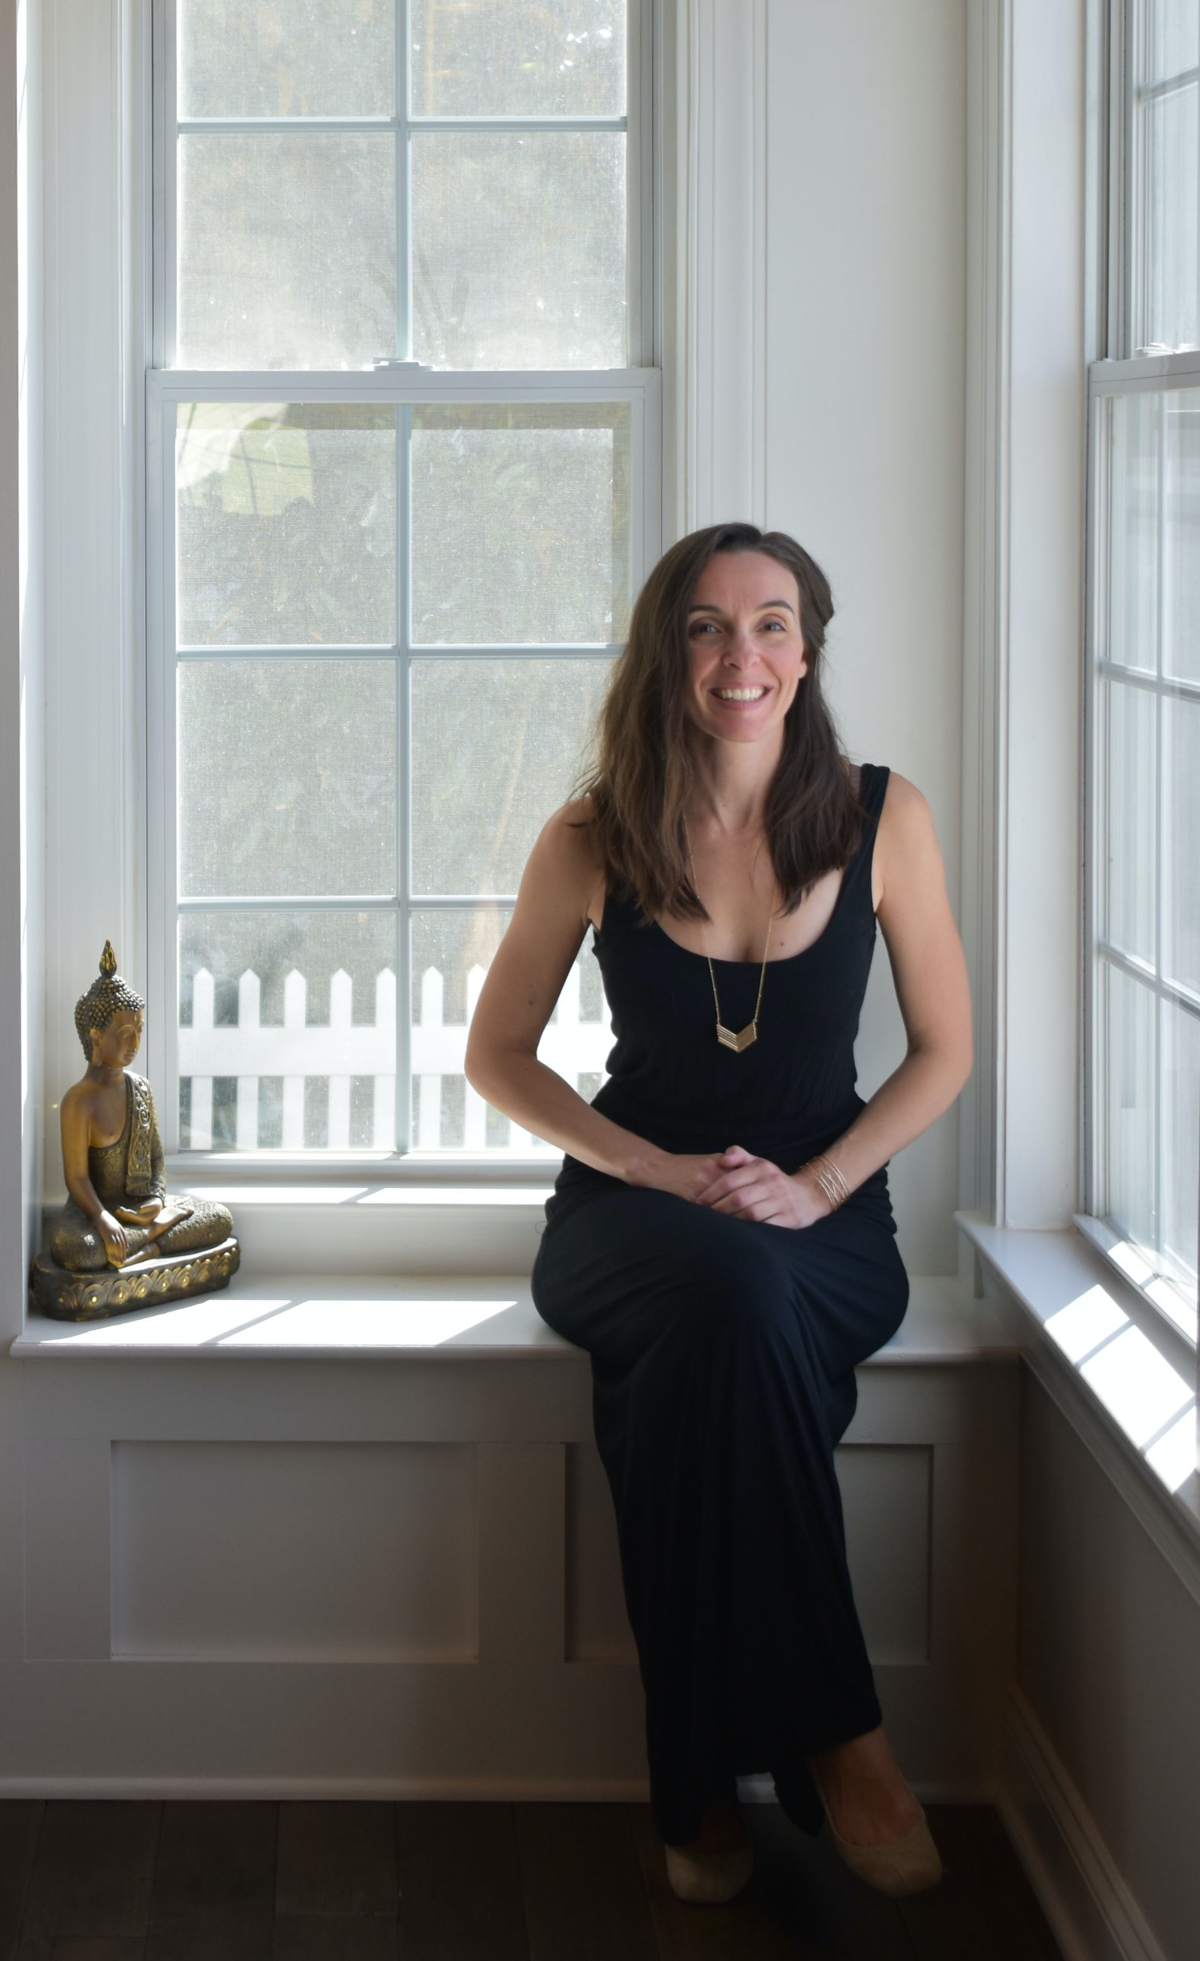 Christine Camarda seated in front of window with buddha, books, vases, photographs and other decor items as inspiration